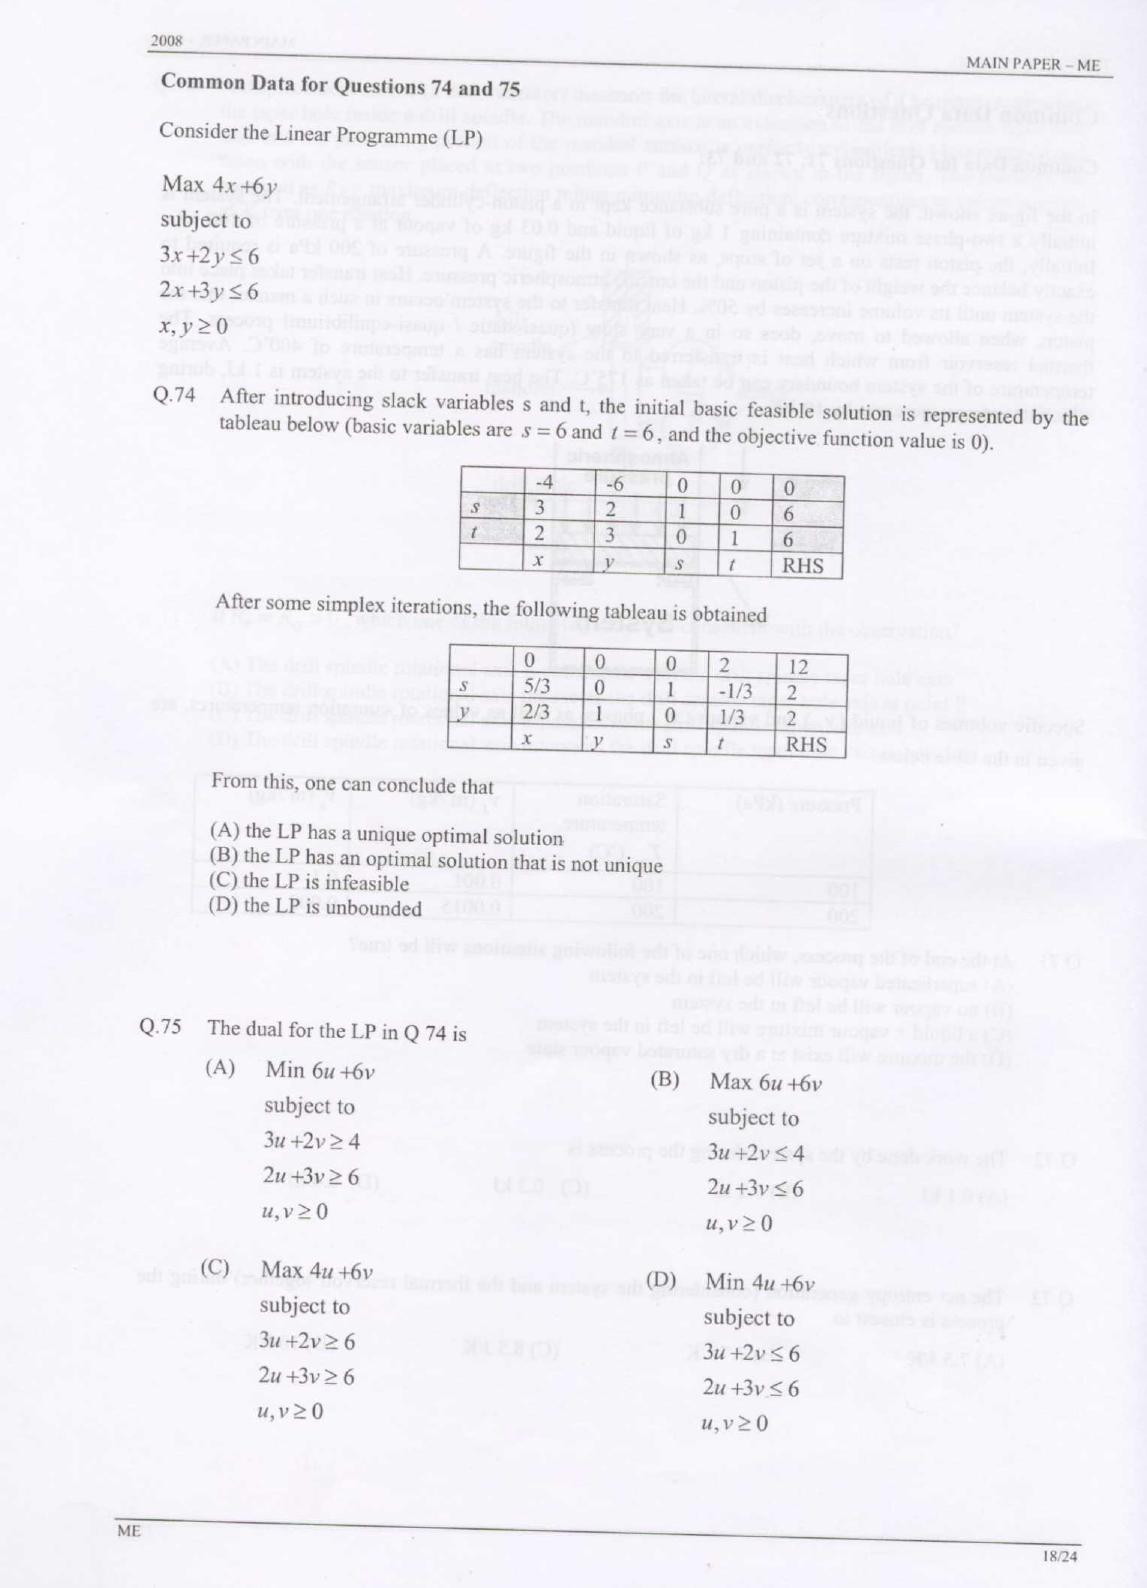 GATE 2008 Mechanical Engineering (ME) Question Paper with Answer Key - Page 18